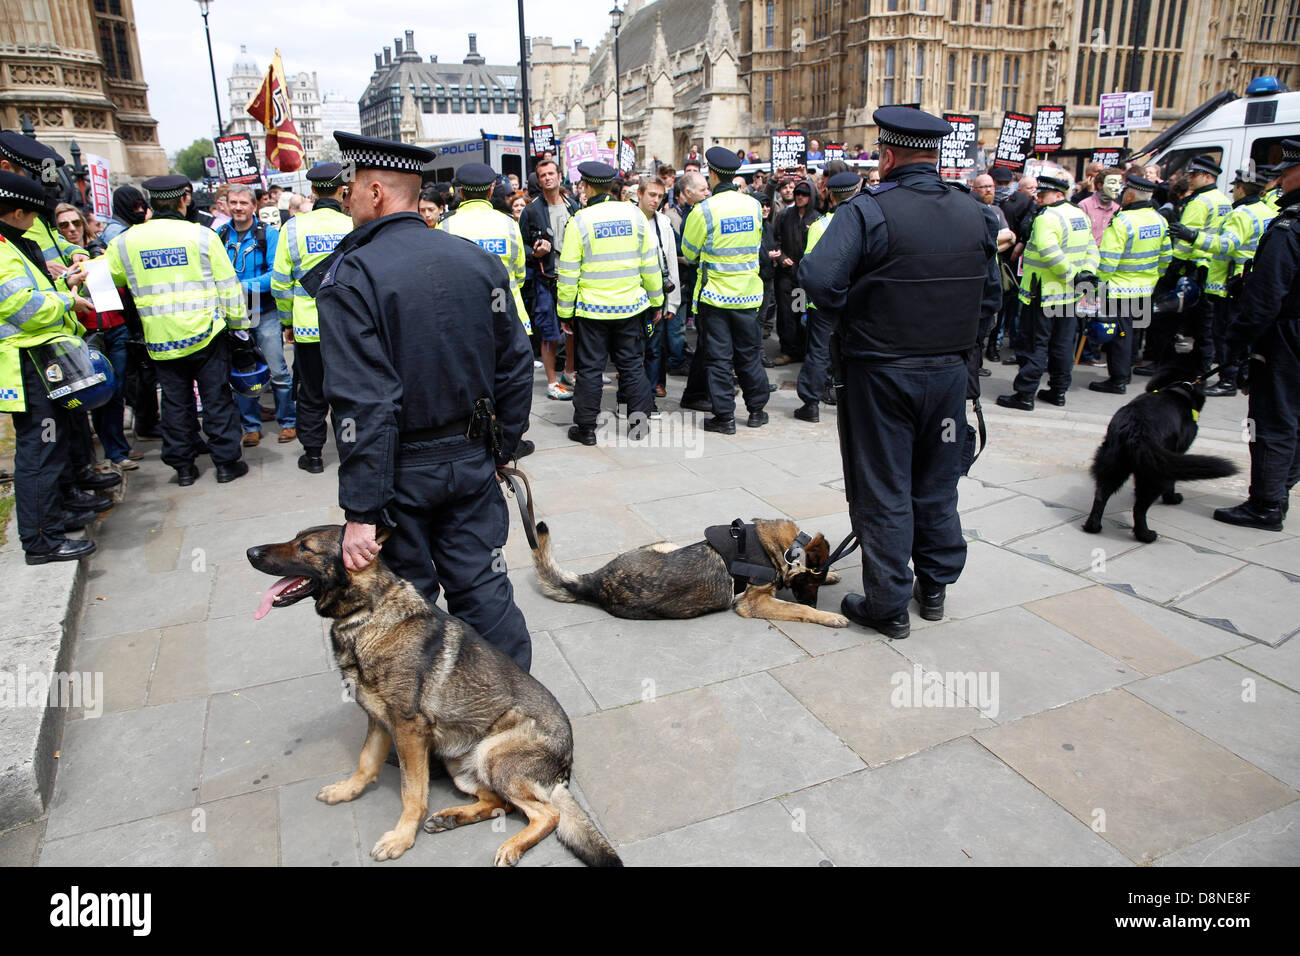 London, UK. 1st June 2013. Rally at Westminster against the BNP national party by anti fascist campaigners. Police dogs were brought to the scene. Credit:  Lydia Pagoni/Alamy Live News Stock Photo